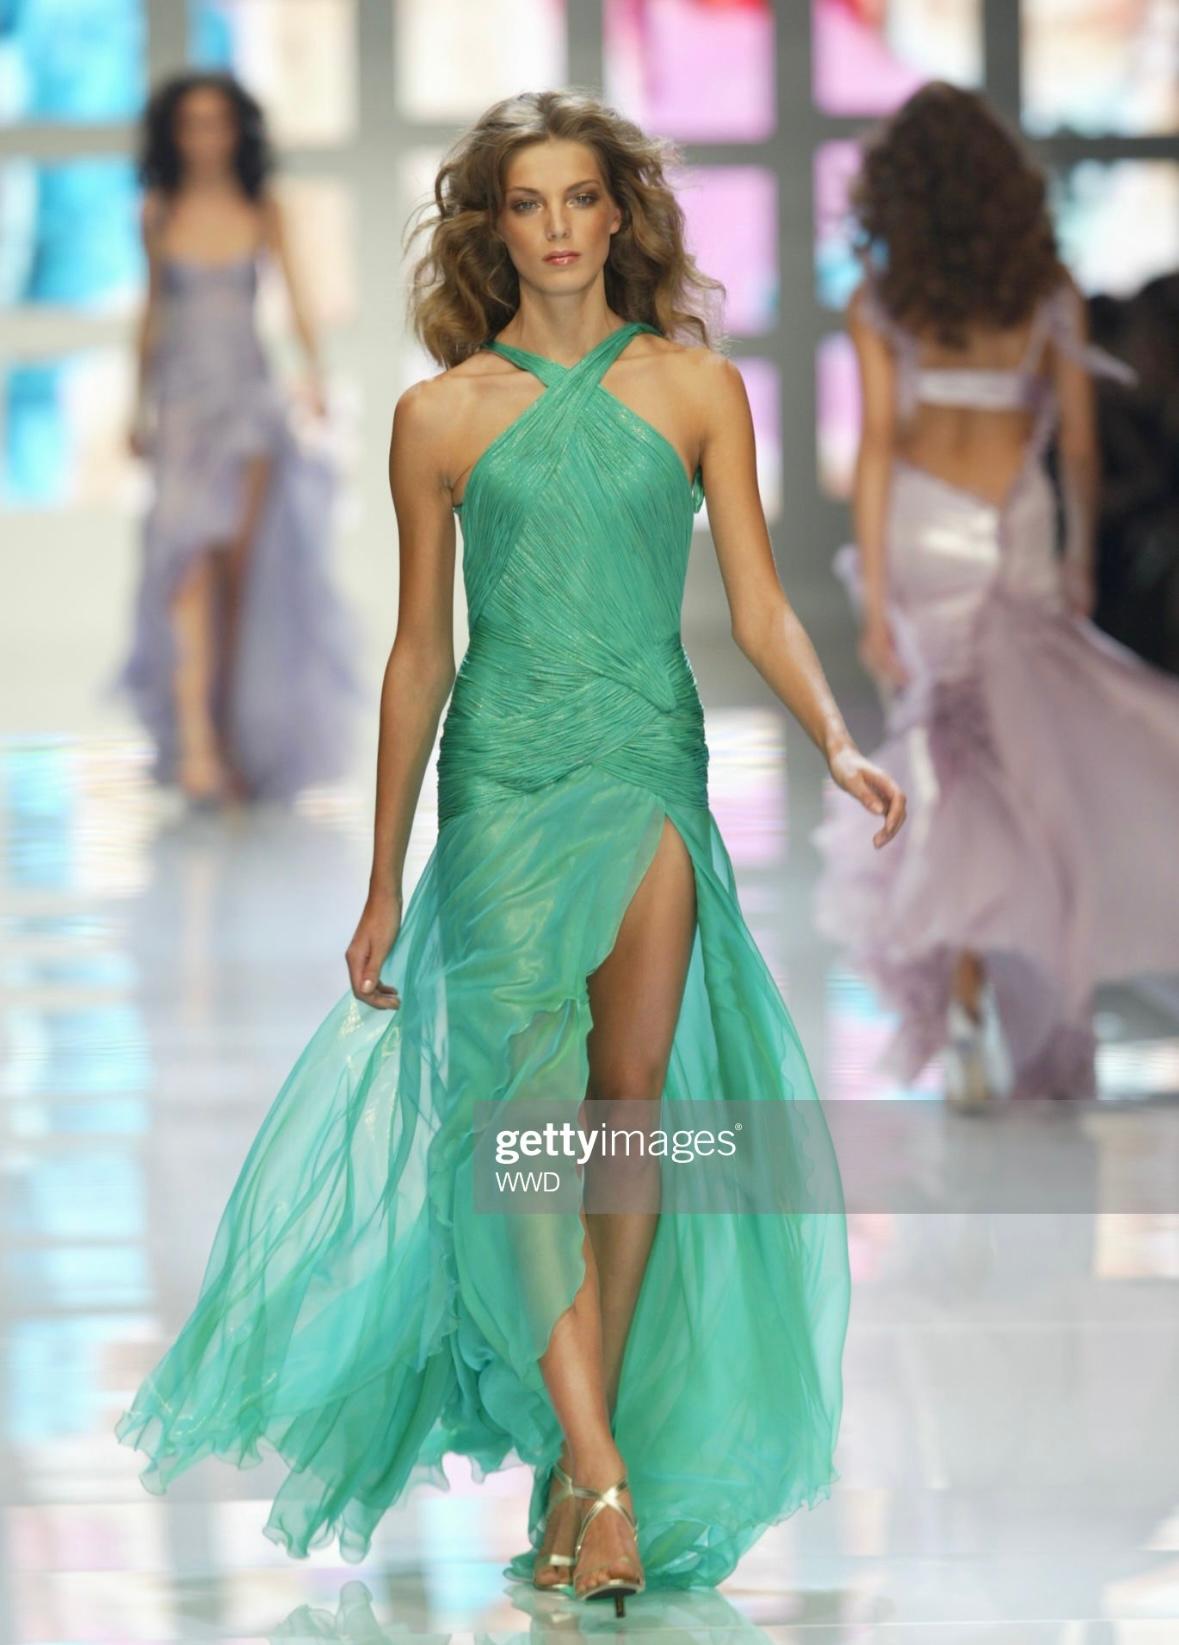 Presenting a truly stunning metallic green Atelier Versace halterneck gown, designed by Donatella Versace. From the Spring/Summer 2004 collection, this dress debuted on the ready-to-wear runway as look 53, modeled by Daria Werbowy. This